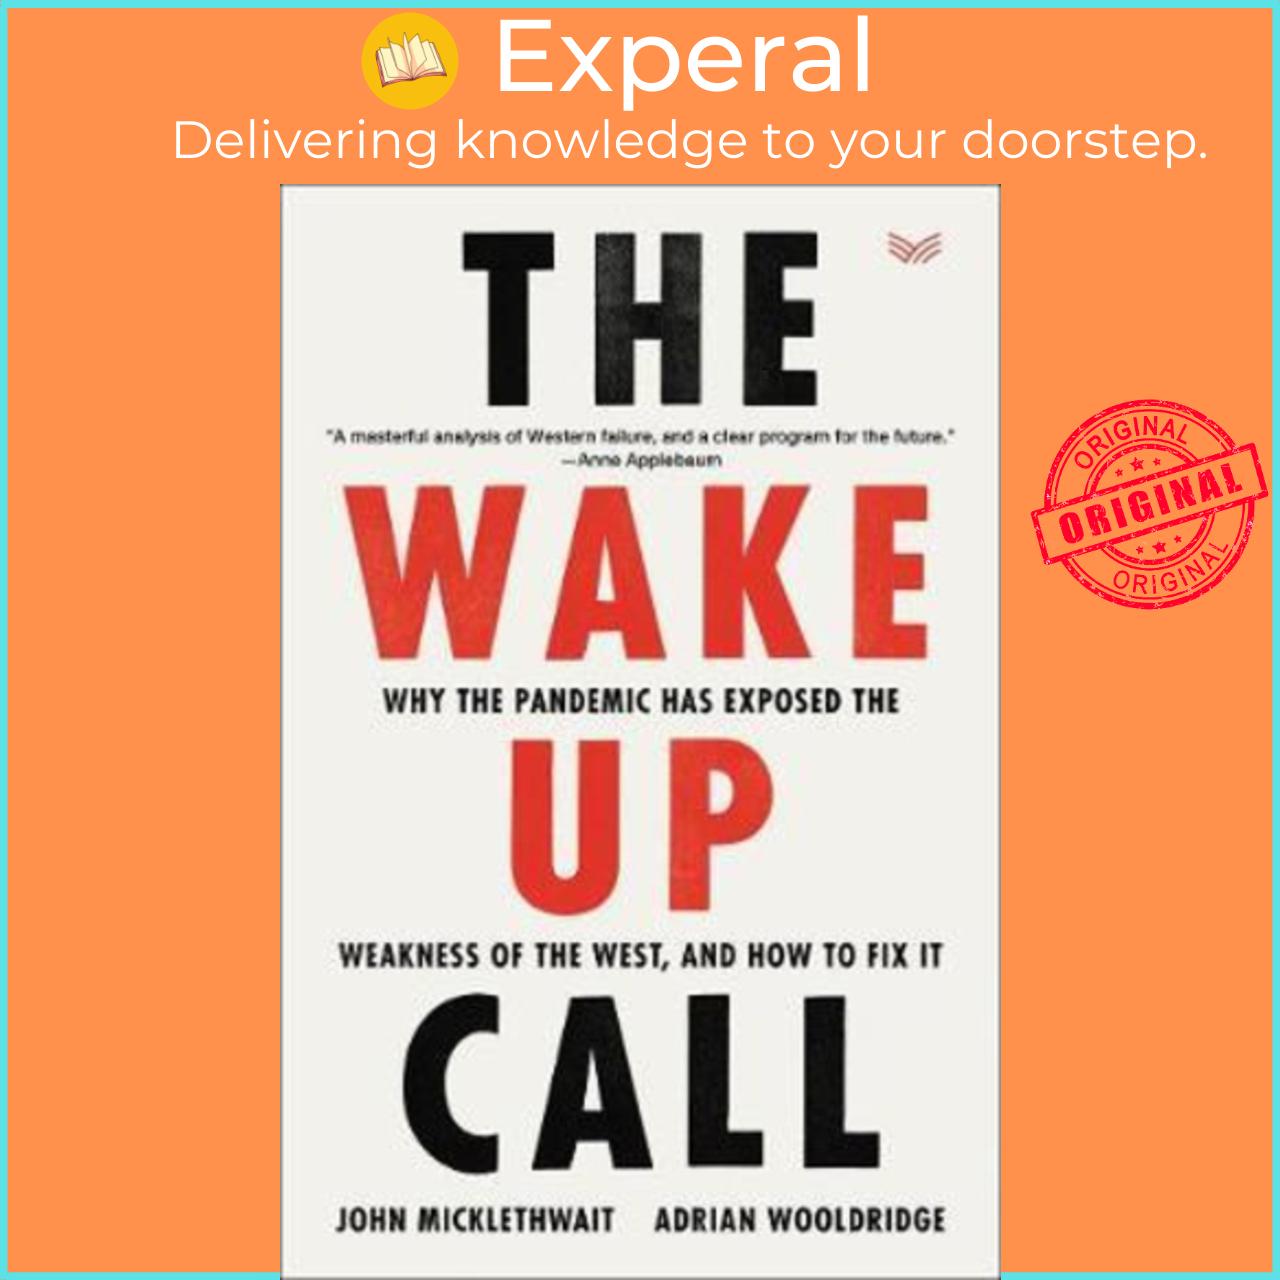 Sách - The Wake-Up Call : Why the Pandemic Has Exposed th by John Micklethwait Adrian Wooldridge (US edition, hardcover)